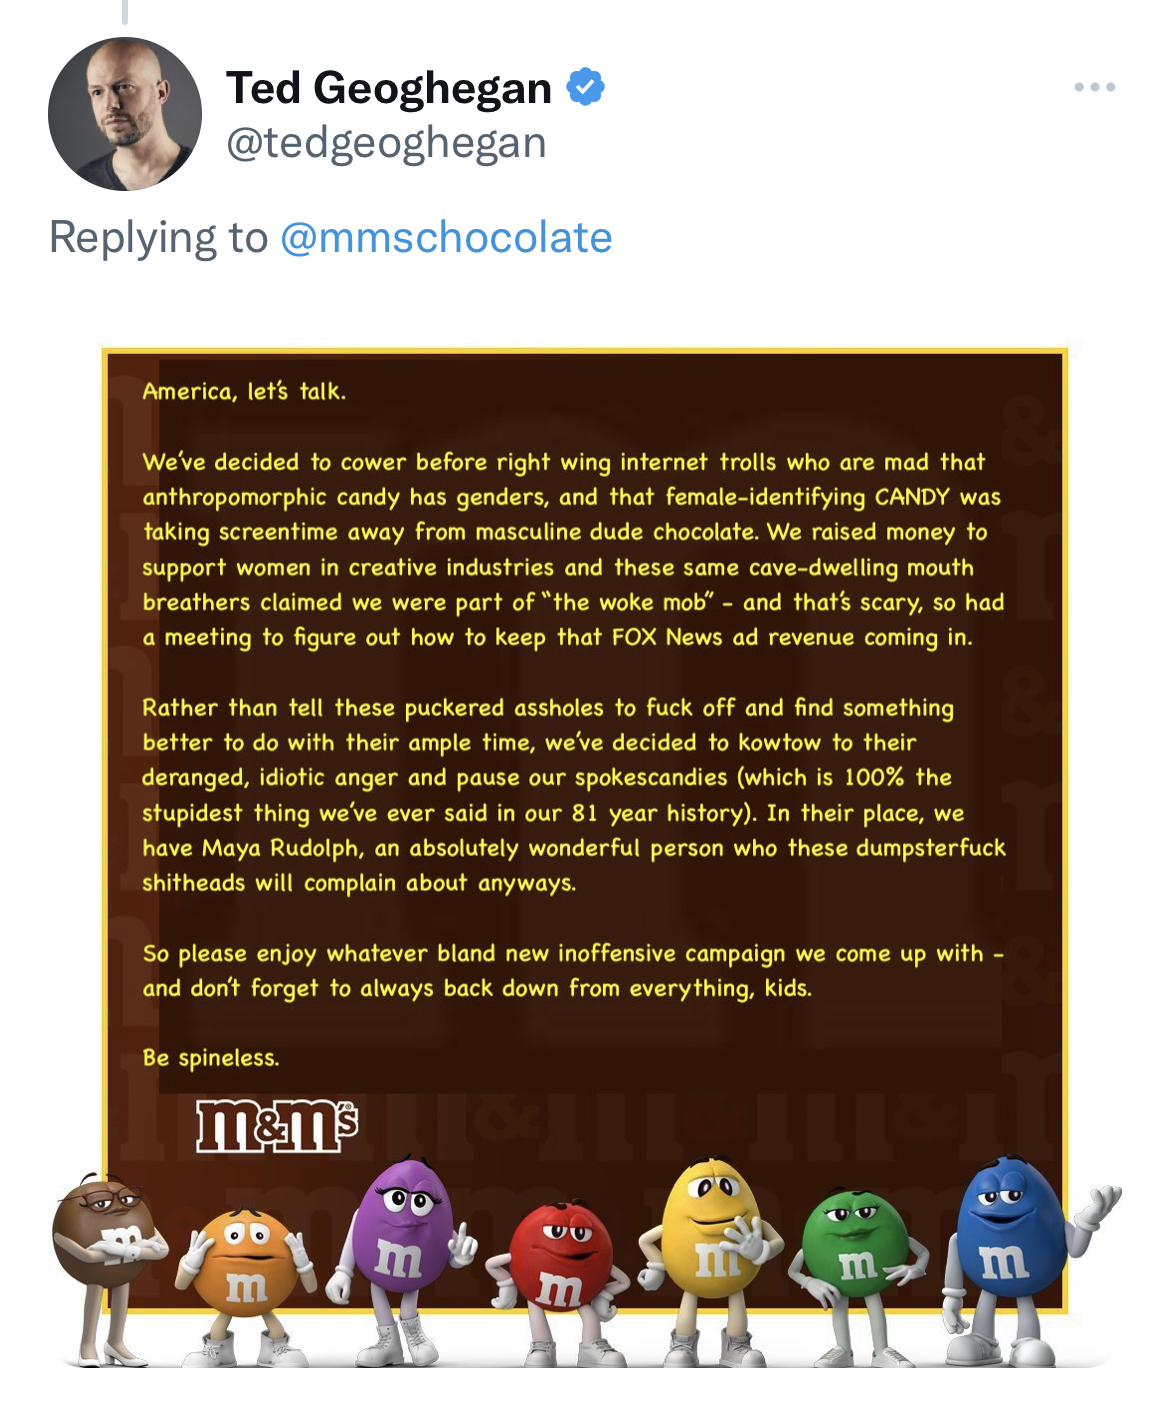 M&M's message spoofs - george carlin - Ted Geoghegan America, let's talk. We've decided to cower before right wing internet trolls who are mad that anthropomorphic candy has genders, and that femaleidentifying Candy was taking screentime away from masculi